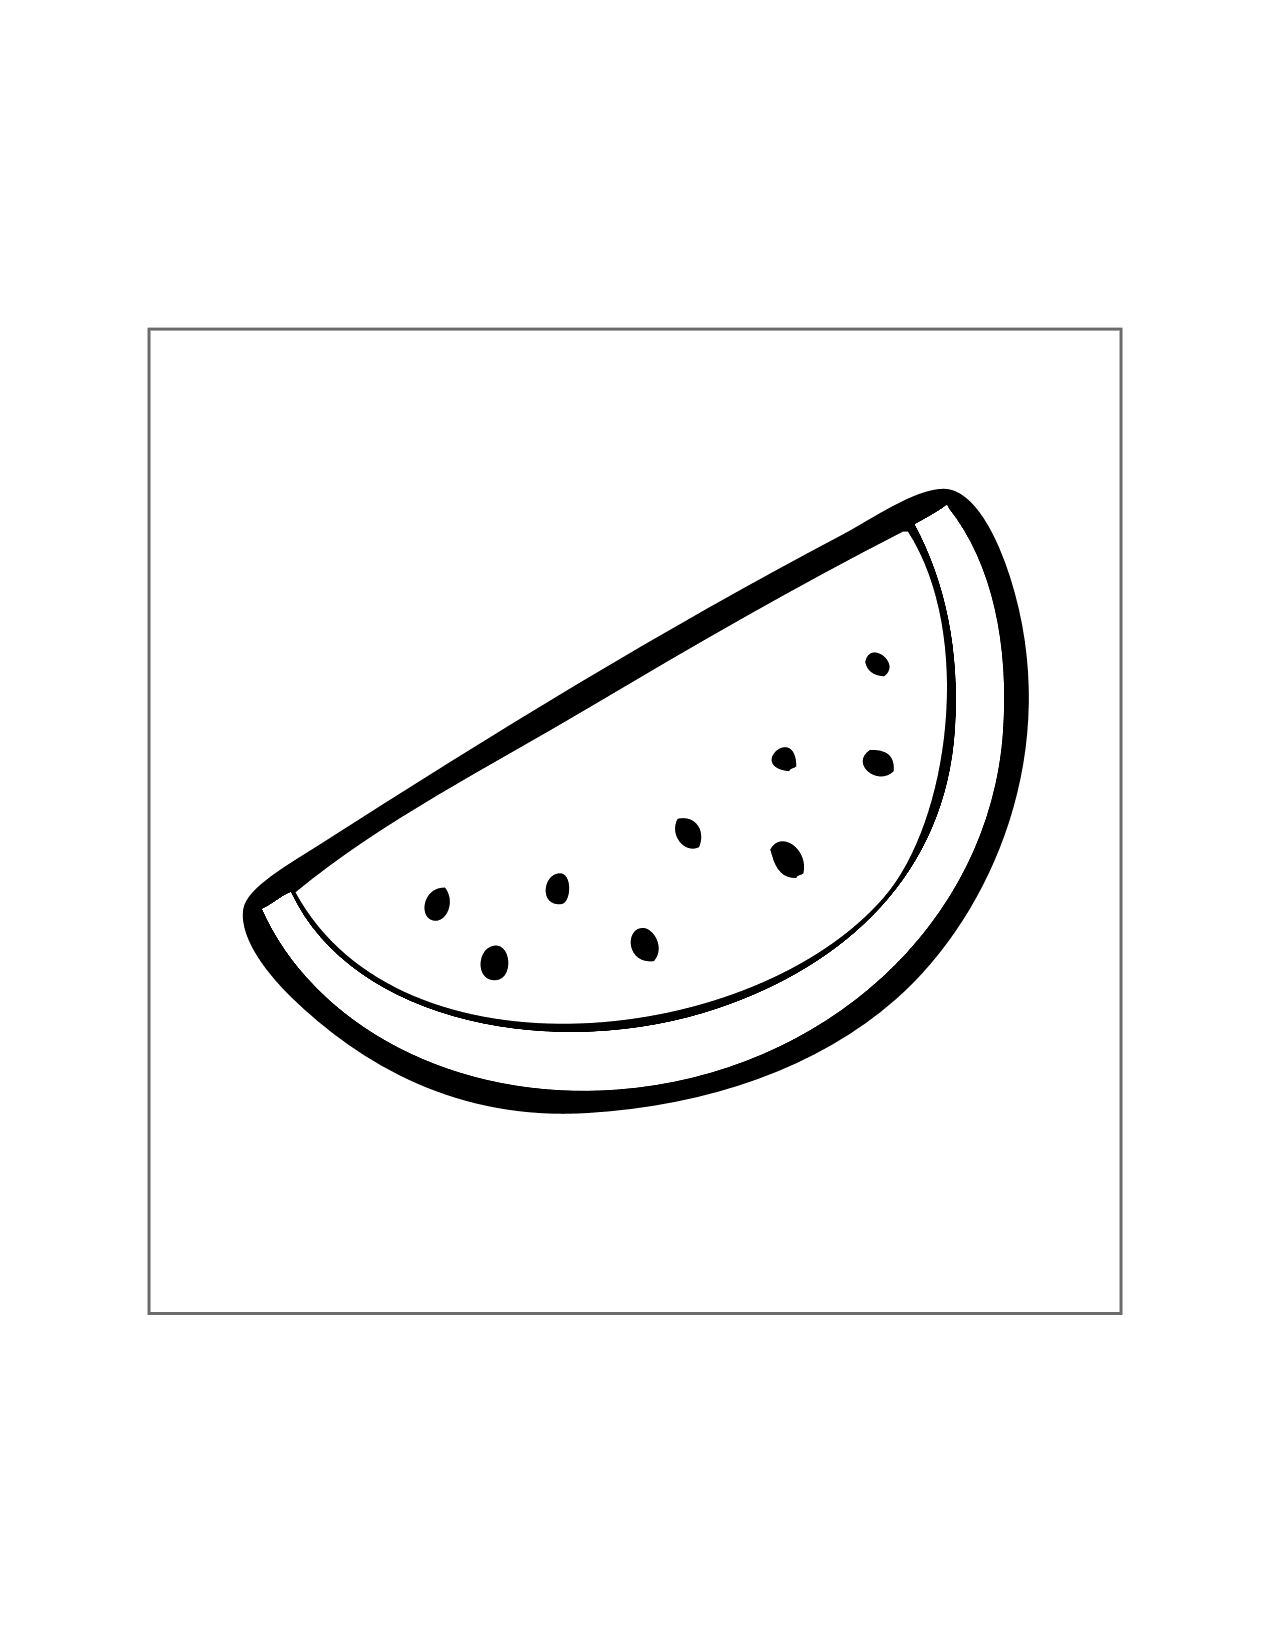 Watermelon Wedge Coloring Pages